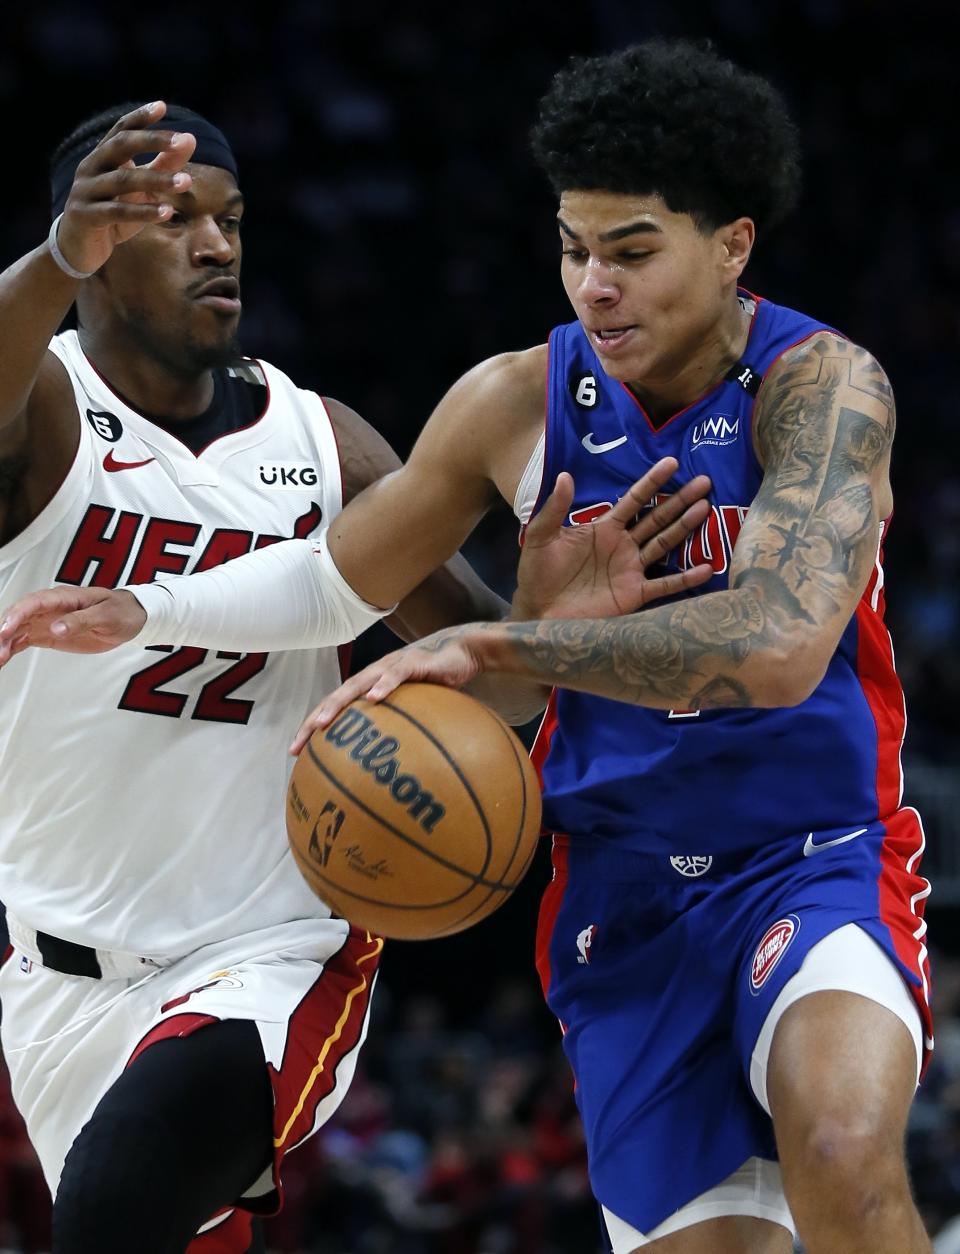 Detroit Pistons guard Killian Hayes, right, drives to the basket against Miami Heat forward Jimmy Butler (22) during the first half of an NBA basketball game Sunday, March 19, 2023, in Detroit. (AP Photo/Duane Burleson)